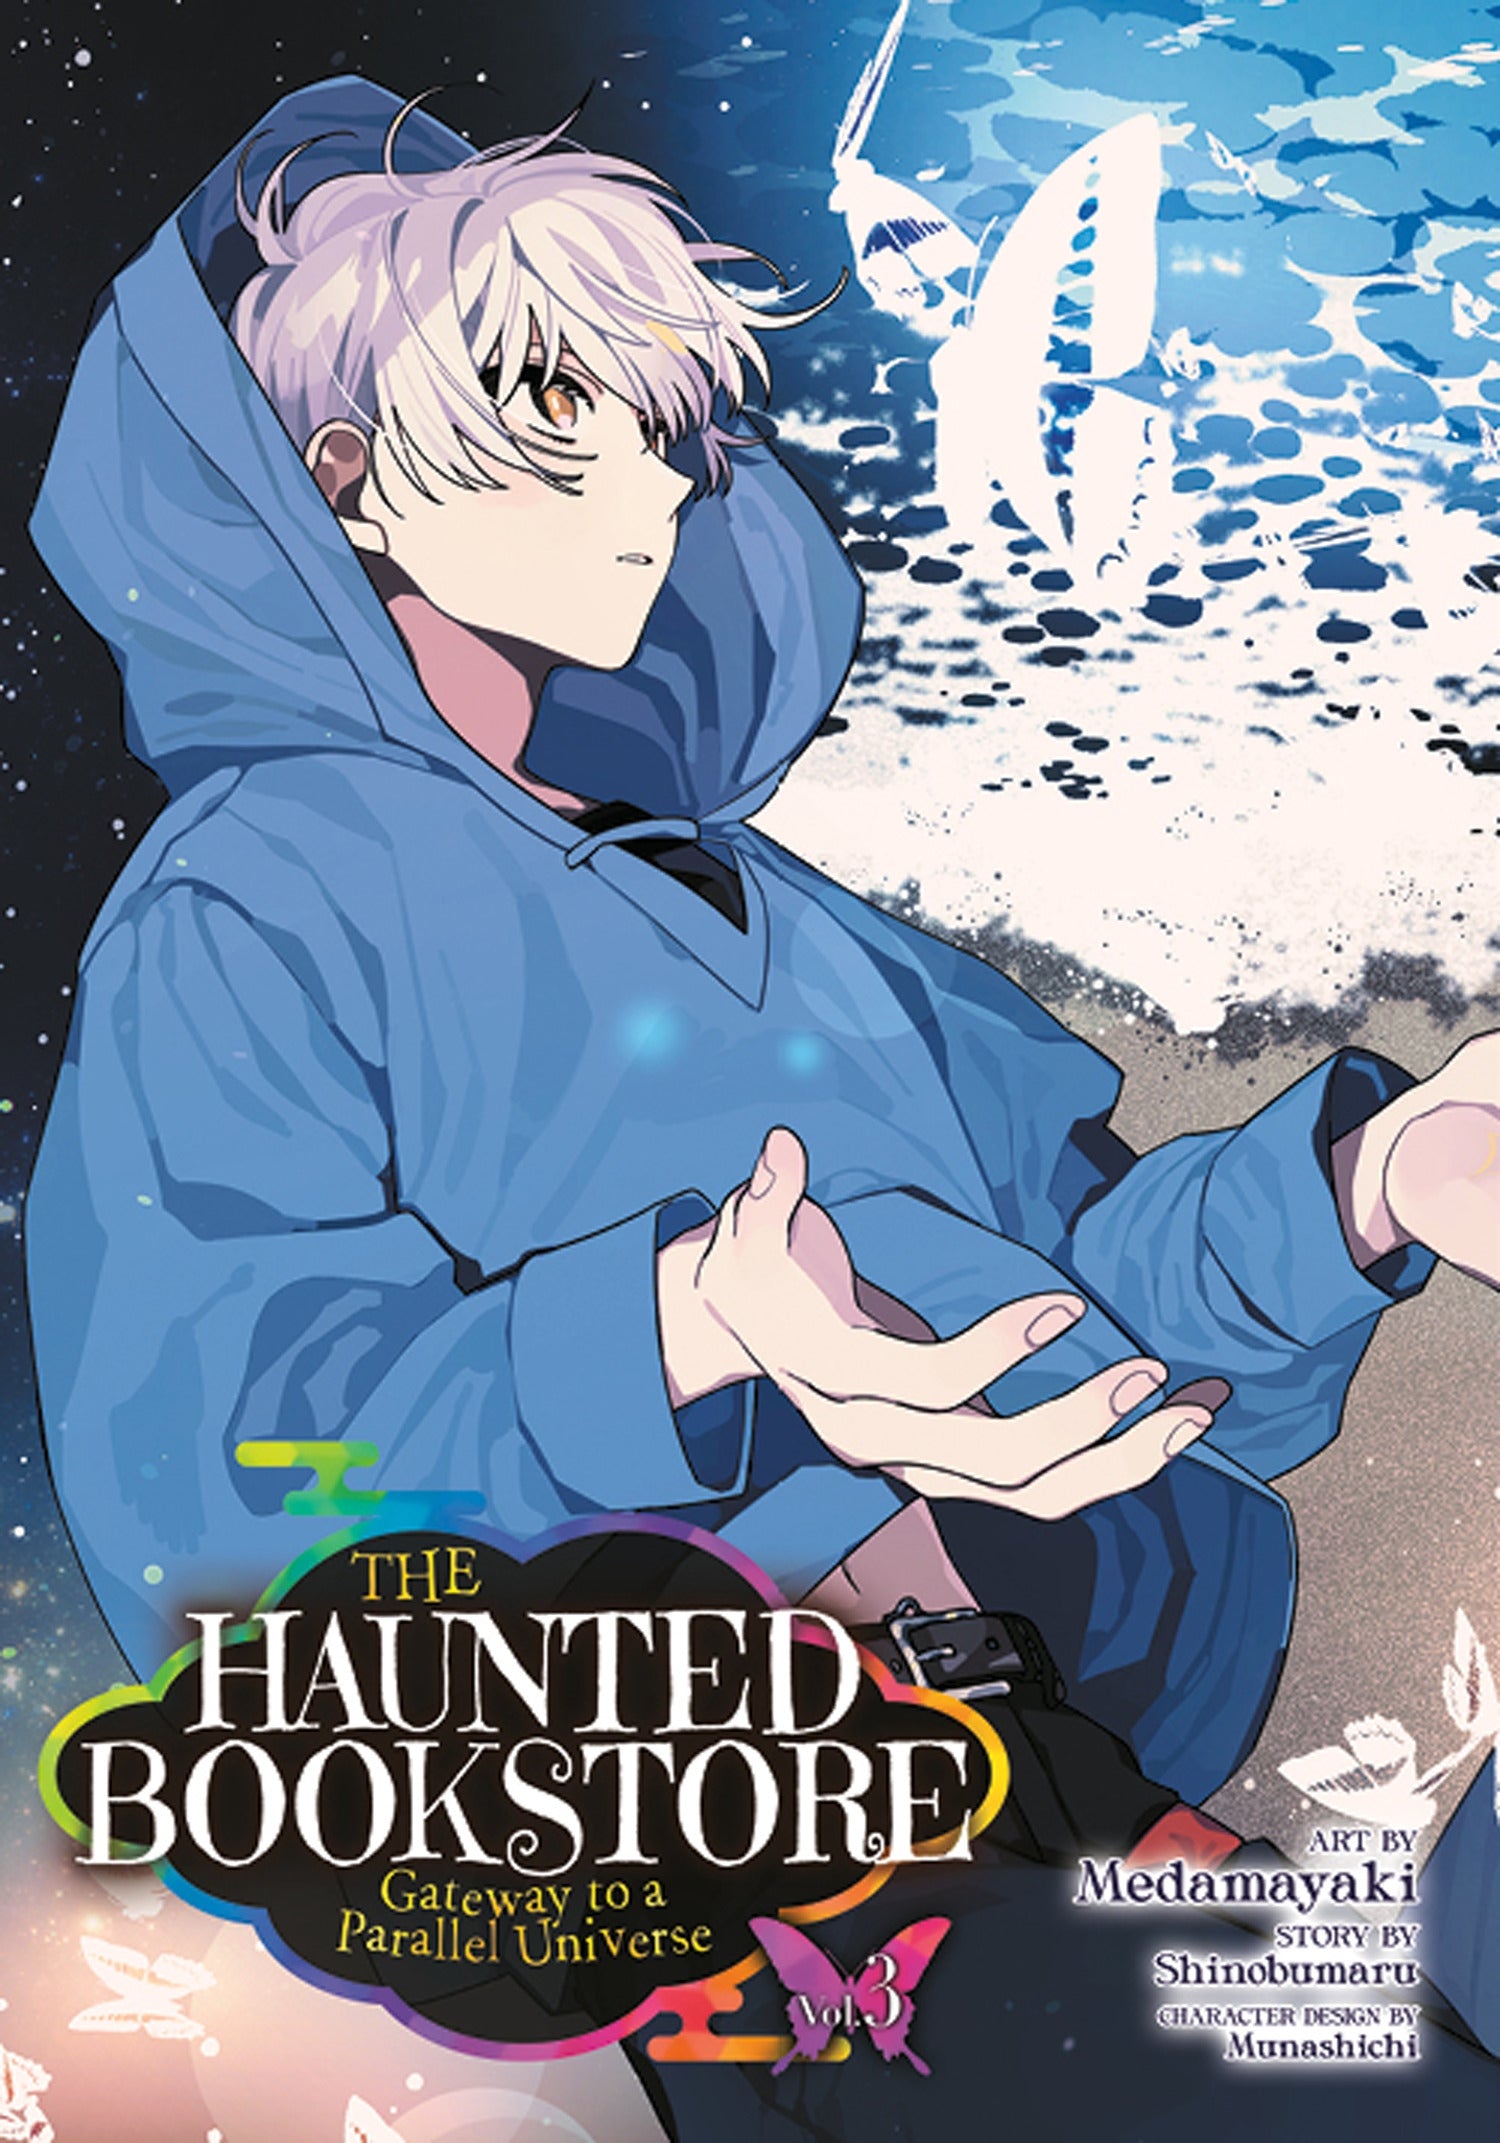 The Haunted Bookstore - Gateway to a Parallel Universe (Manga) - Vol. 3